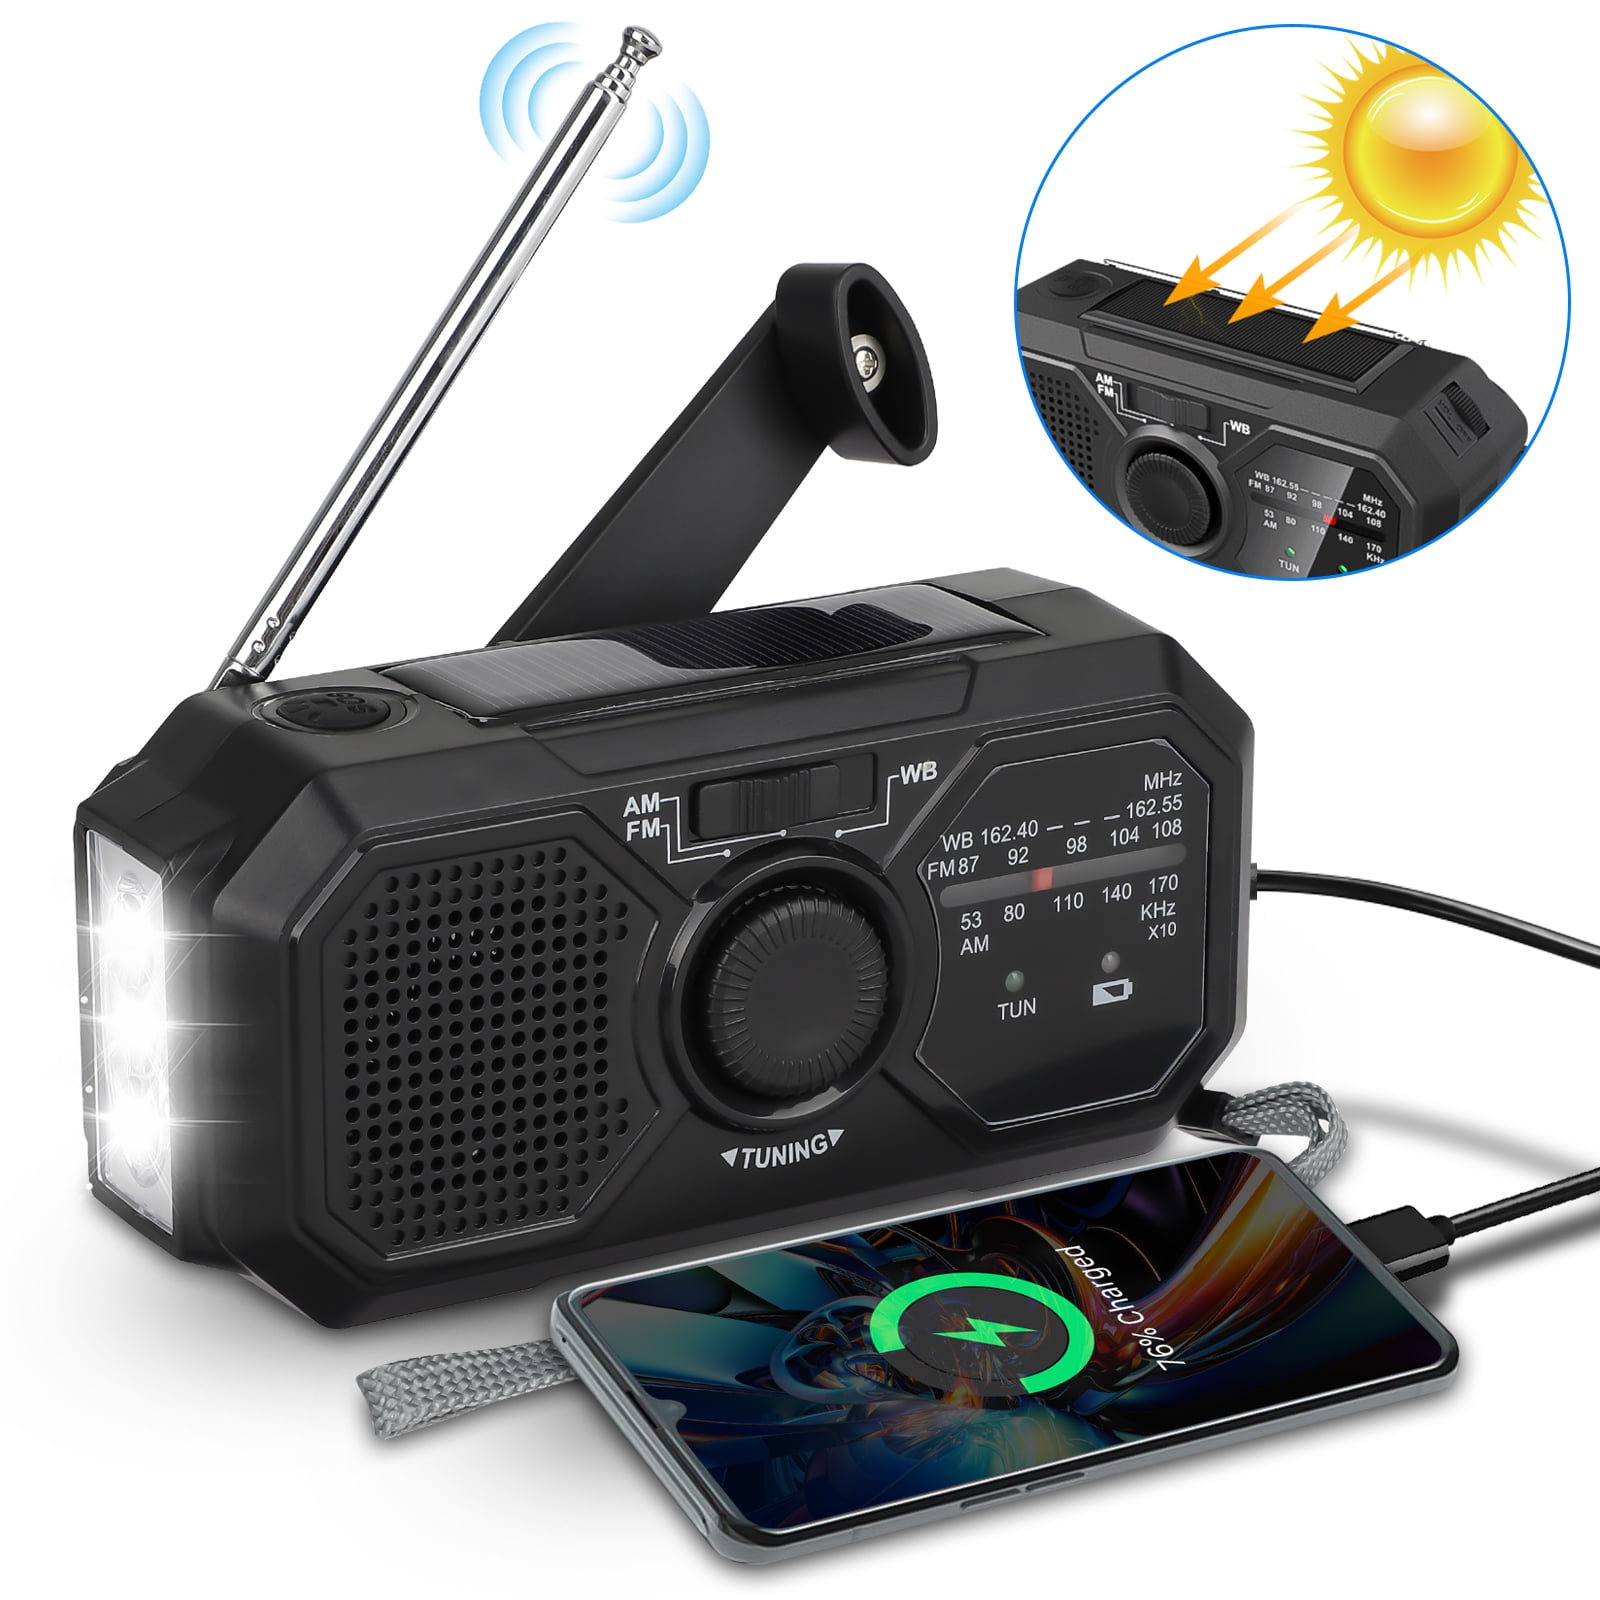 5000mAh Hand Crank Solar Weather Radio Camping&Survival 【2020 Newest】 Emergency Radio SOS Alarm for Home USB Cell Phone Power Charger NOAA/AM/FM Portable Radio with LED Flashlight&Reading Lamp